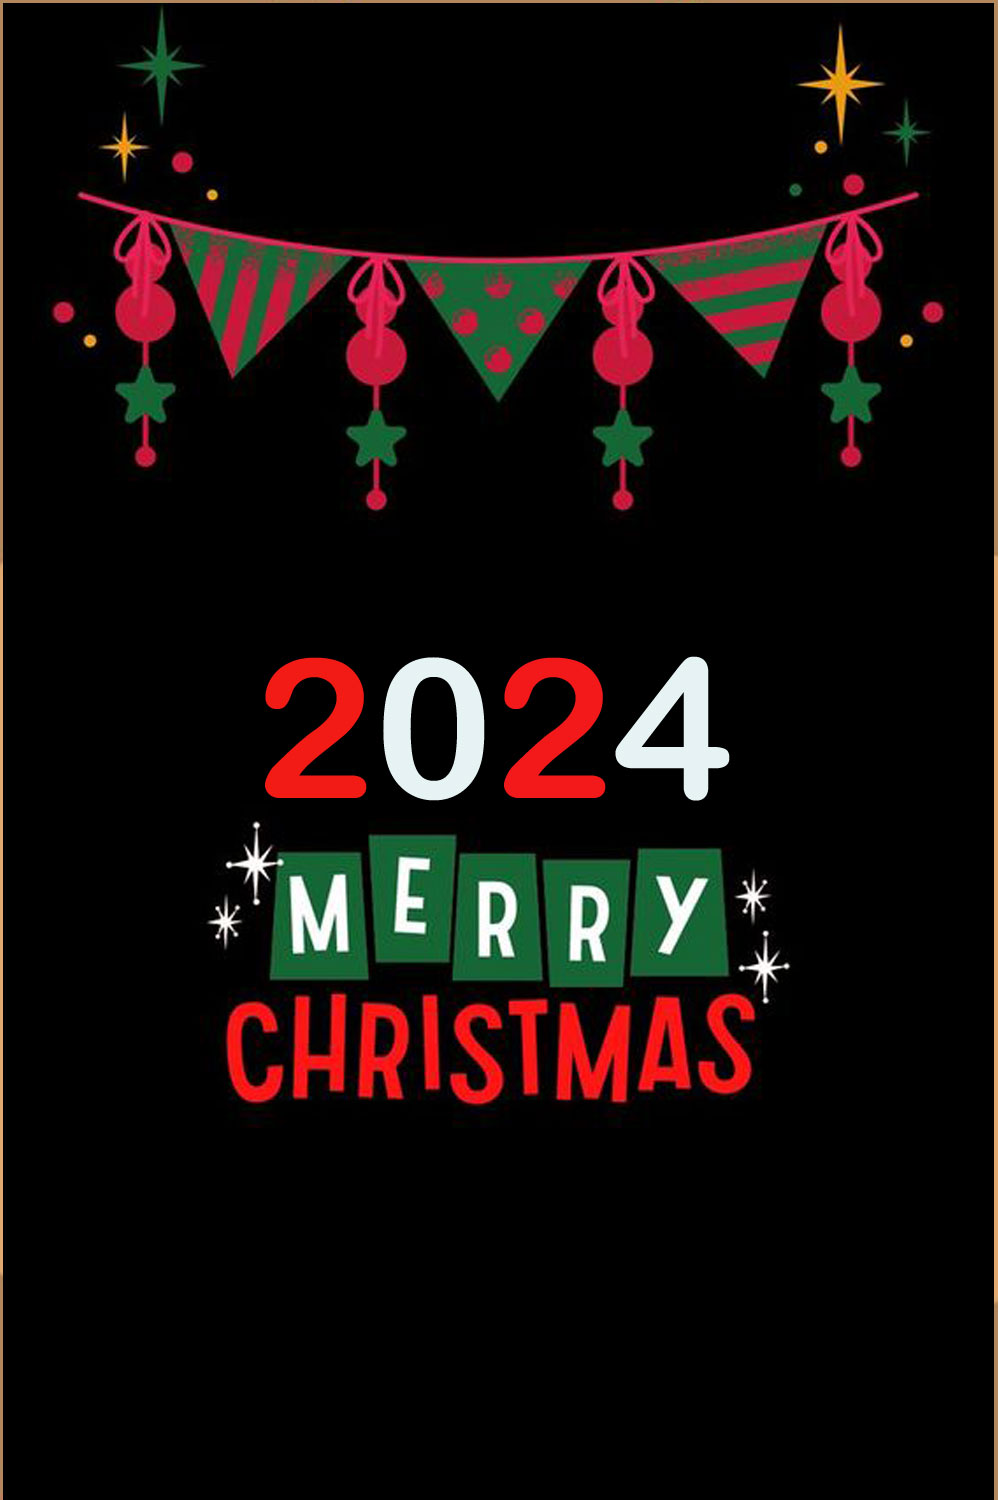 Christmas Cards in 2024 - Happy Birthday Wishes, Memes, SMS & Greeting eCard Images